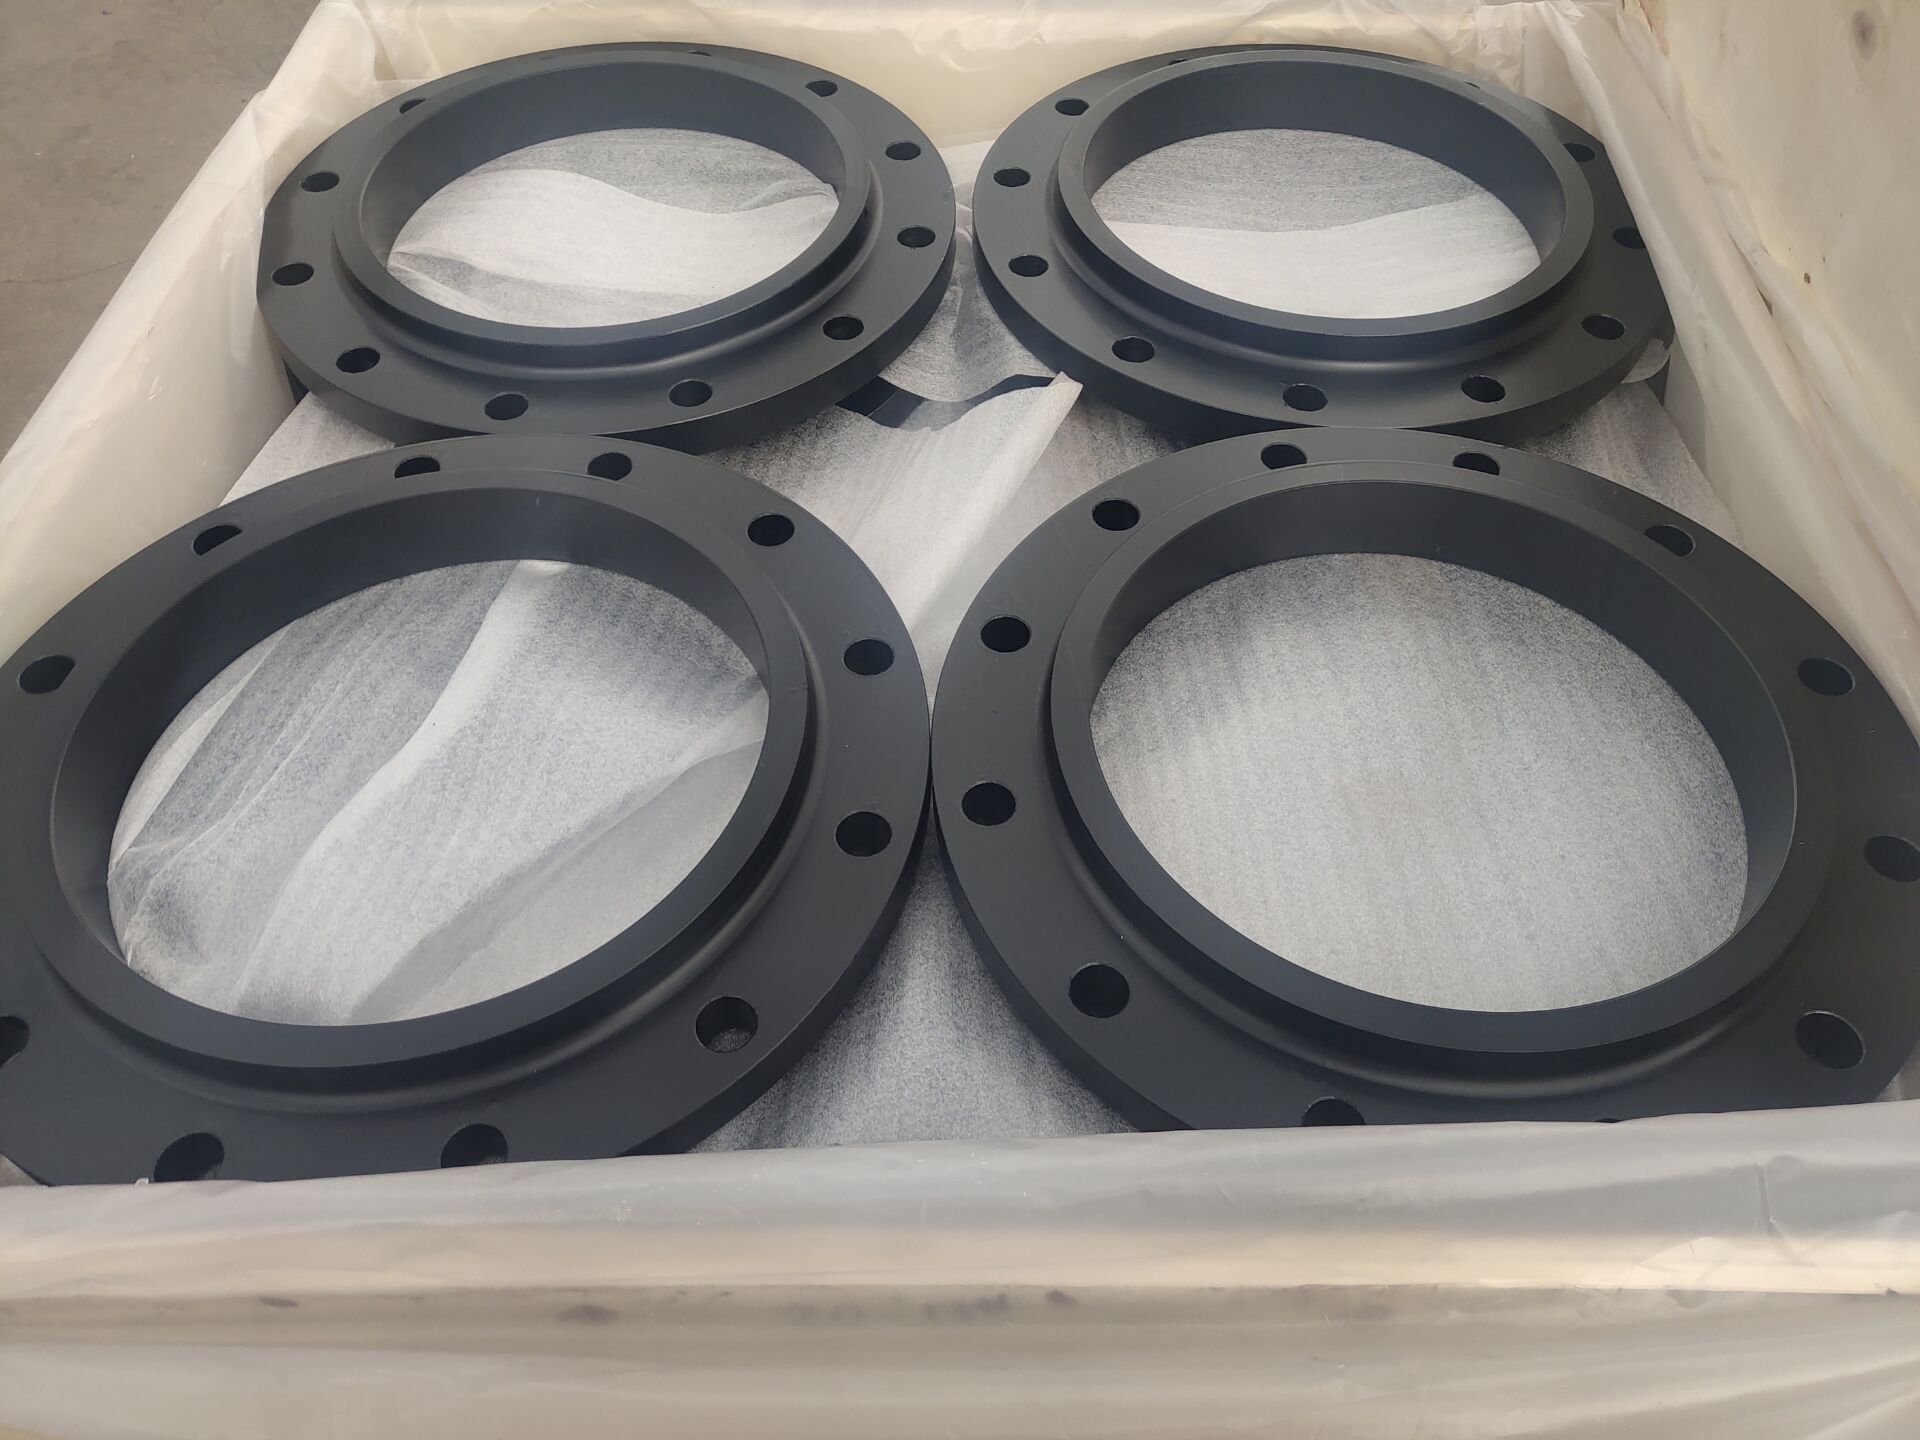 What is the difference between RF and FF flanges?